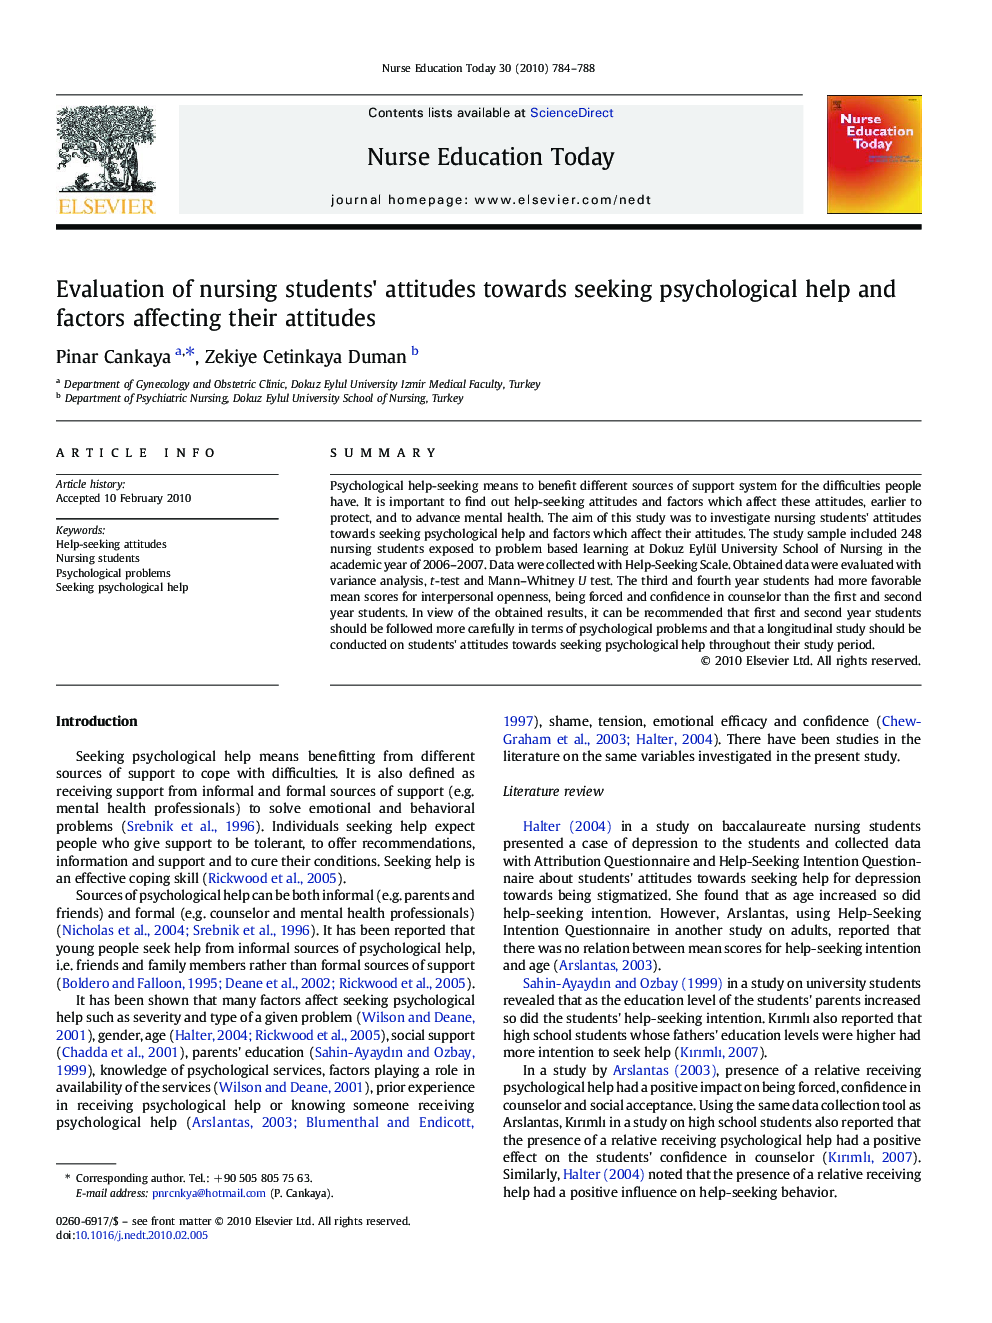 Evaluation of nursing students' attitudes towards seeking psychological help and factors affecting their attitudes